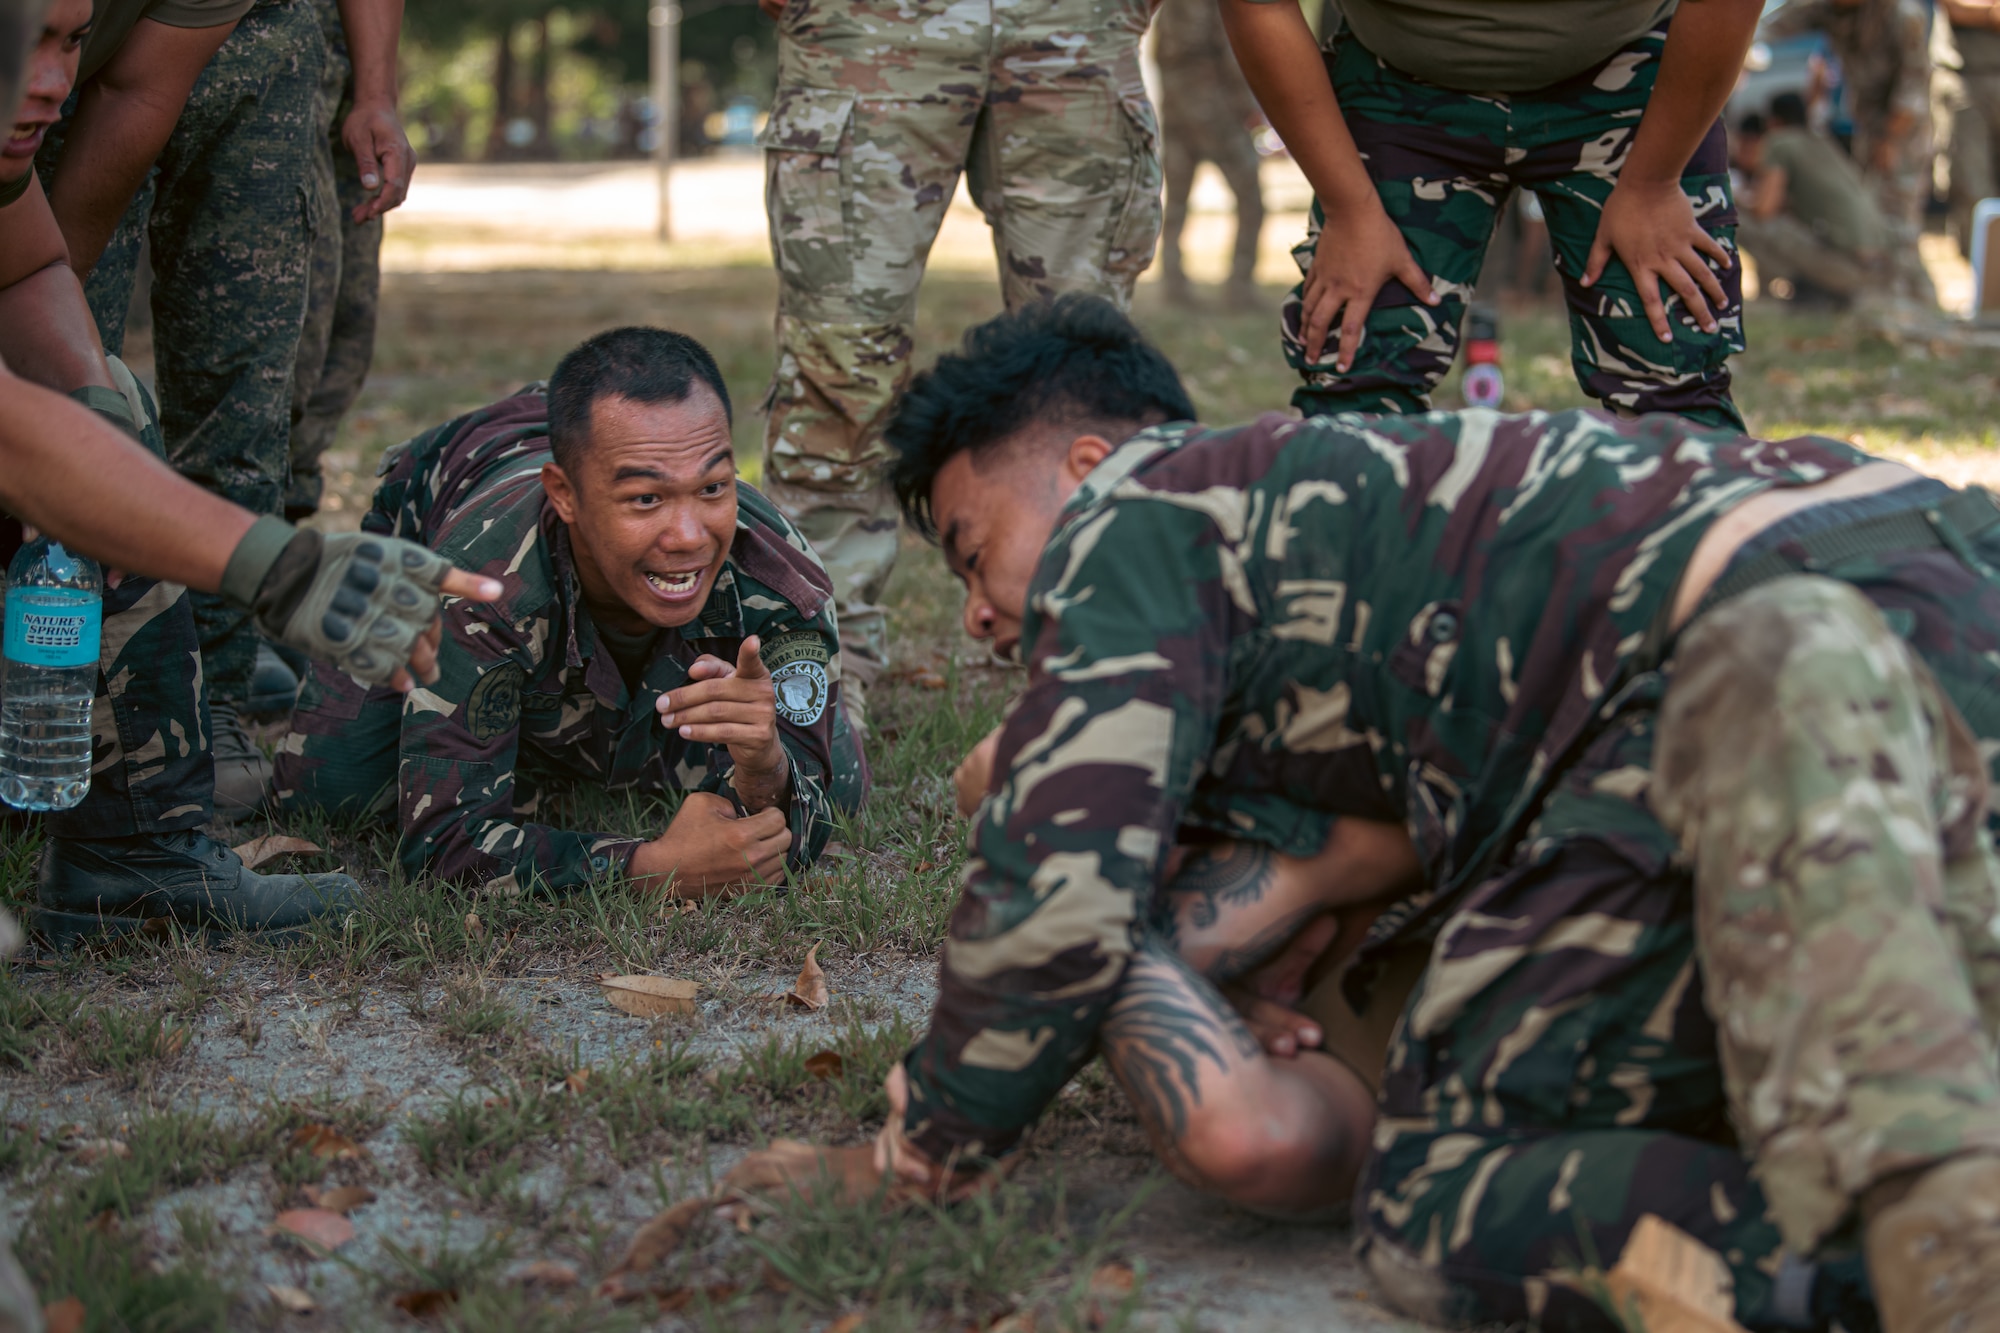 A Philippine Air Force member coaches another member while they practice combatives